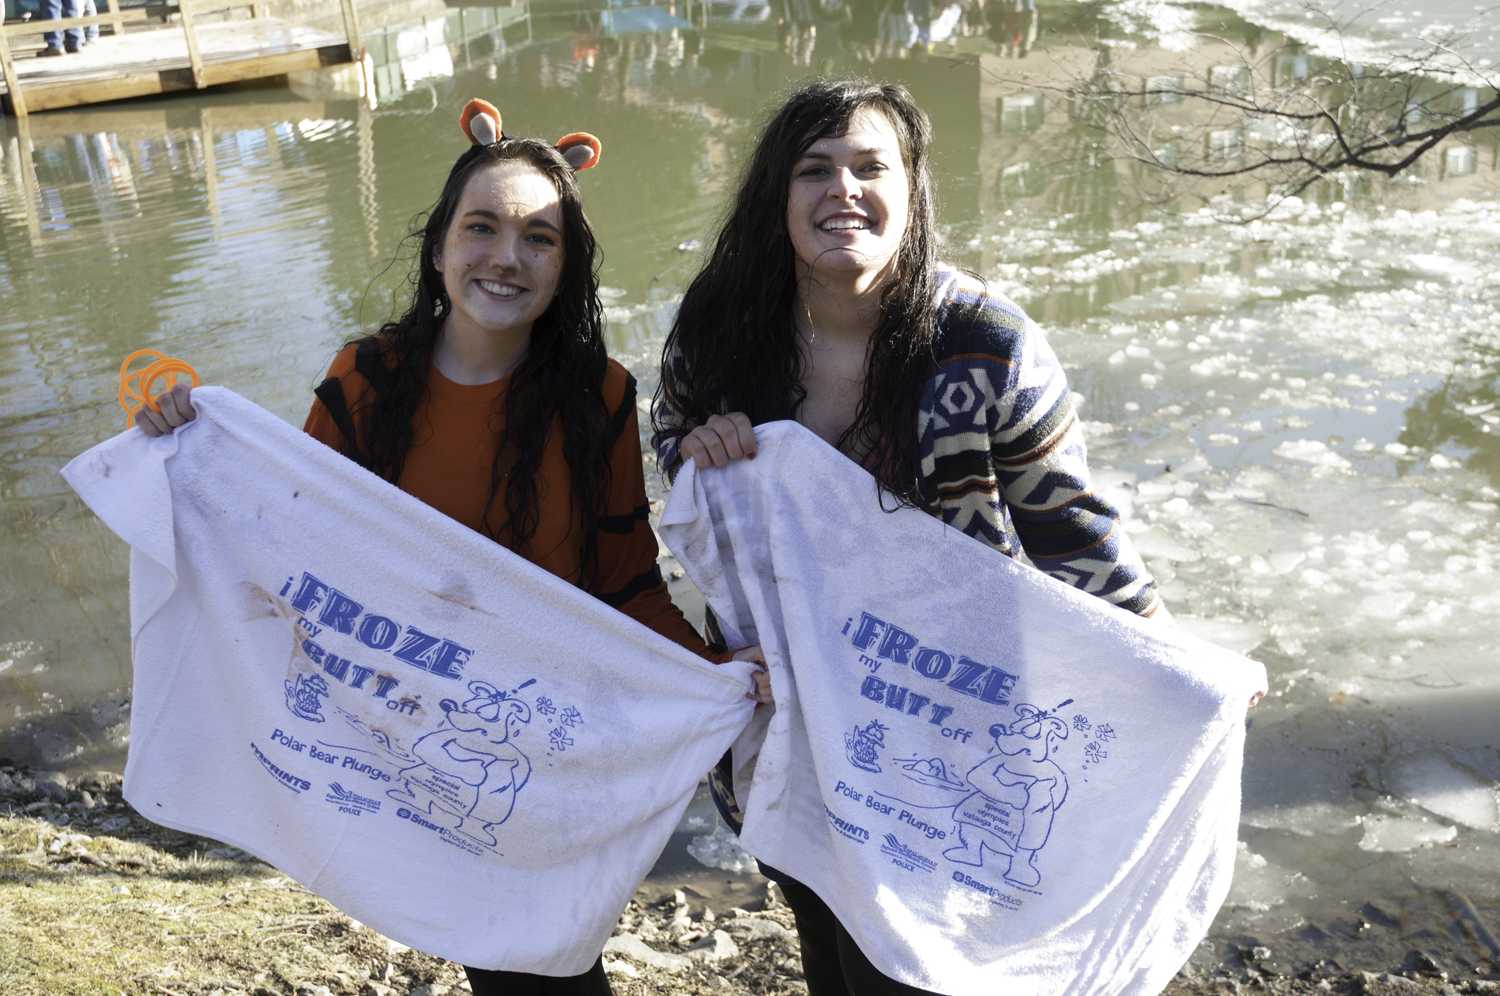 (Left to right) Danielle Davis and Moriah Voorhis pose with their Polar Plunge towels after diving into Duck Pond. Danielle won the contest for best female costume. Photo by Brandon Peterson.